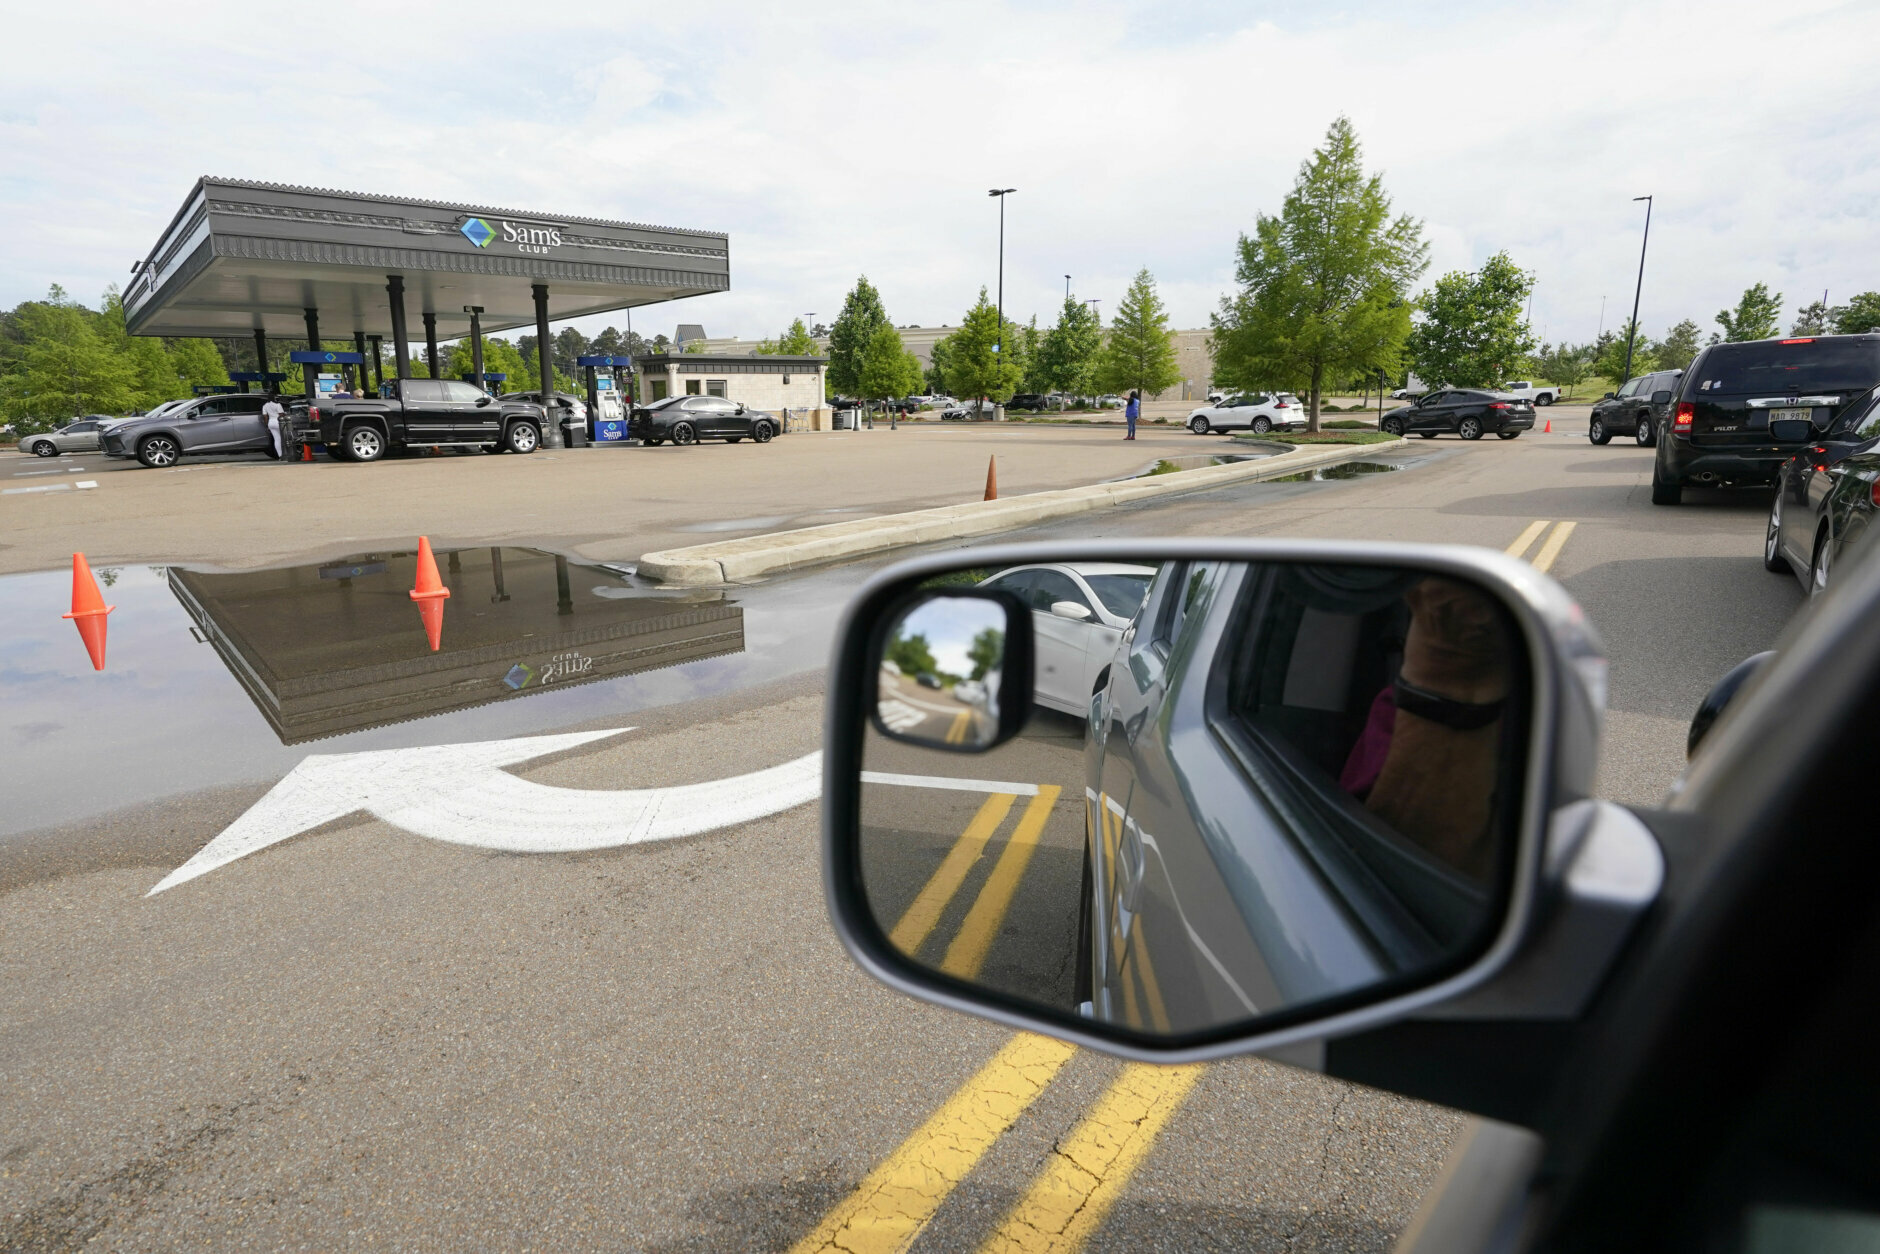 <p>The line of people filling up their vehicles was longer than usual at this Sam&#8217;s Club in Madison, Miss., Tuesday, May 11, 2021. State officials warn that any shortages seen at individual gas stations are a result of people &#8220;panic buying&#8221;, not the Colonial Pipeline shutdown itself, and call on residents to limit unnecessary travel and only buy as much gasoline as they need.</p>
